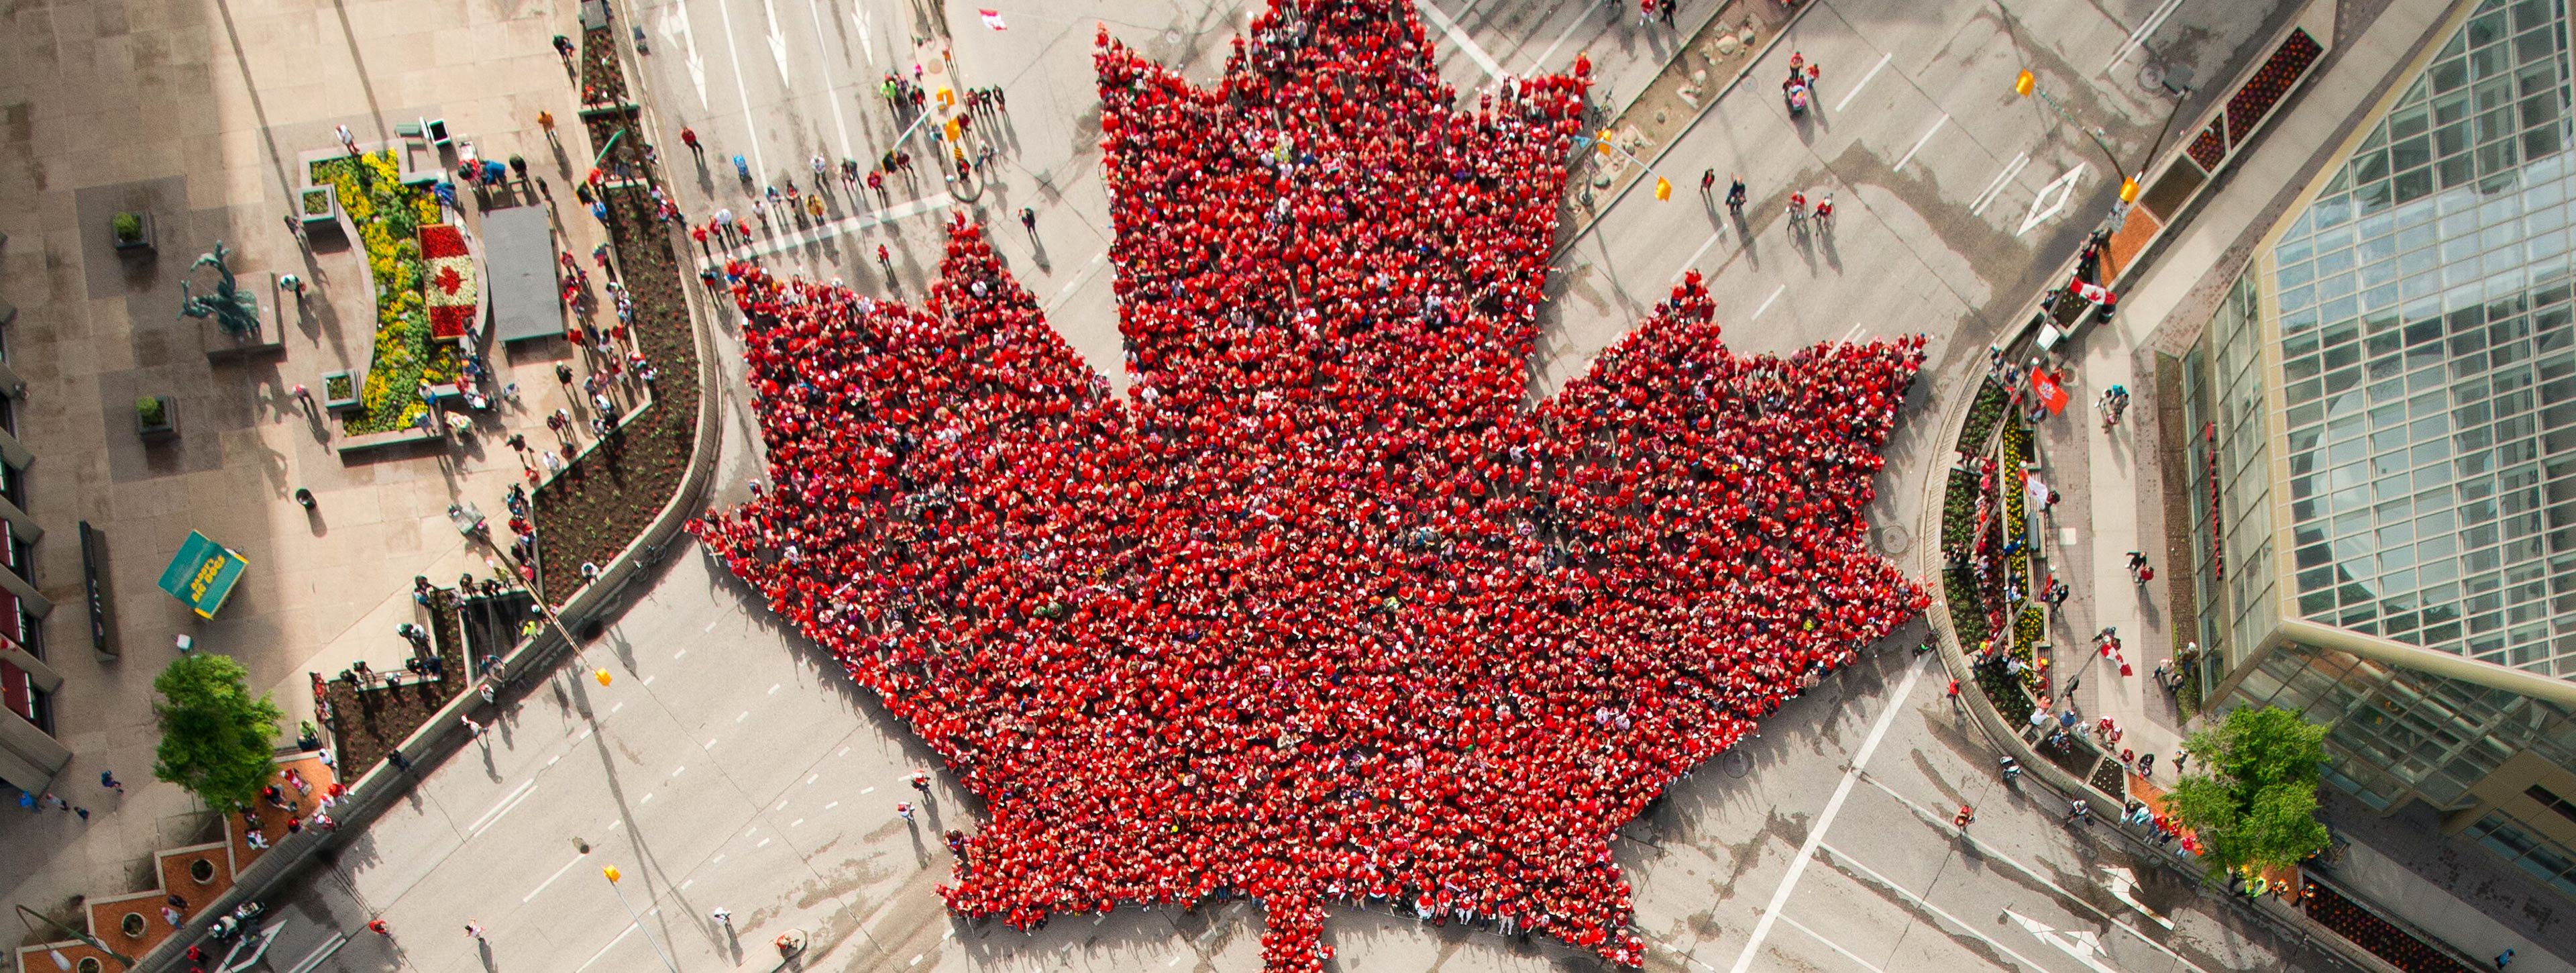 A crowd creating a giant red maple leaf, pictured from above.